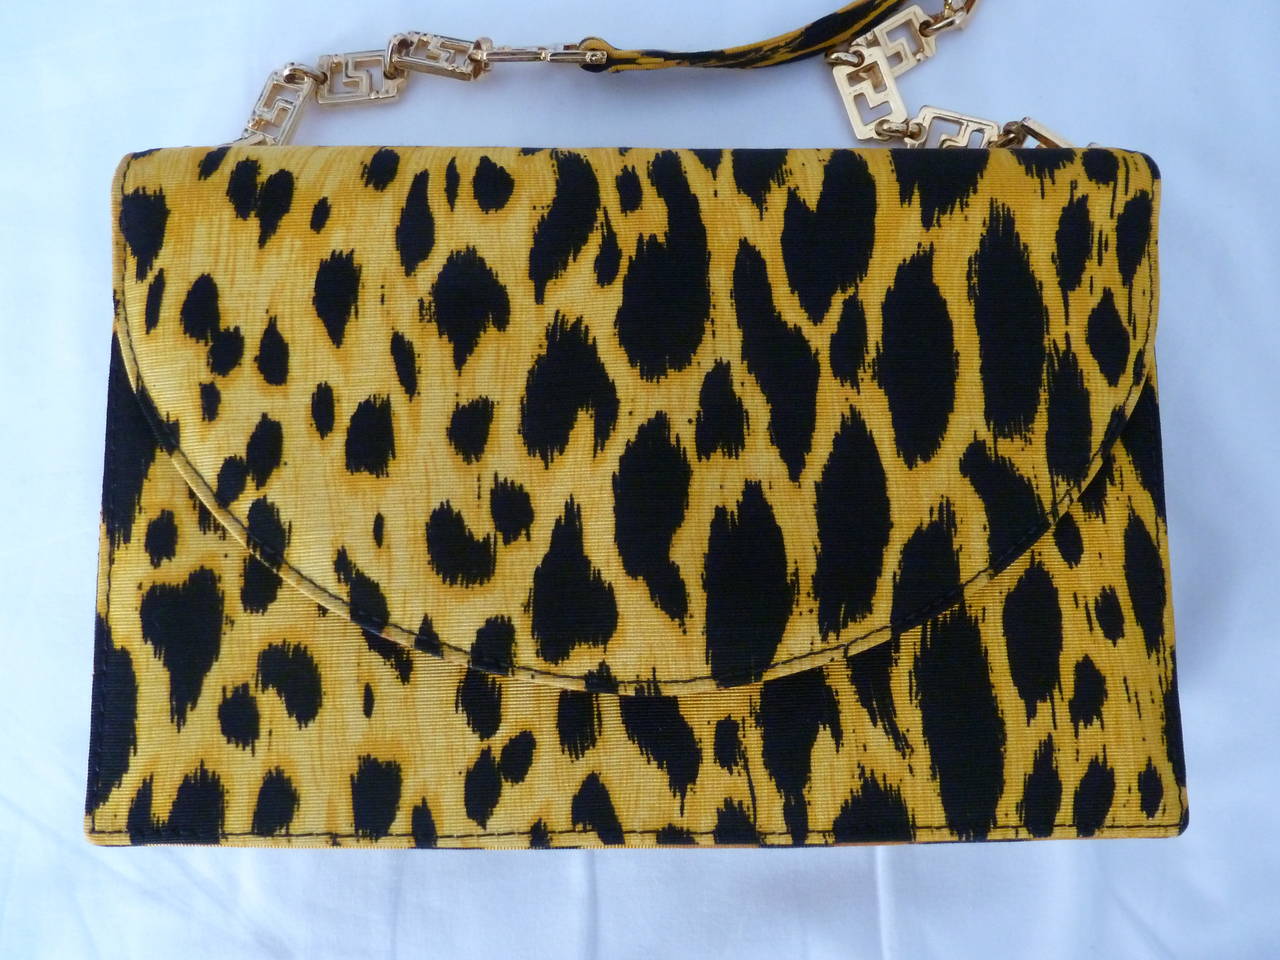 Gianni Versace animal print silk bag from the Spring 1992 collection. The bag features a strap with a gold-tone metal Greca chain detail. The bag was featured in the advertising campaign for the collection.

The bag is new and unused.